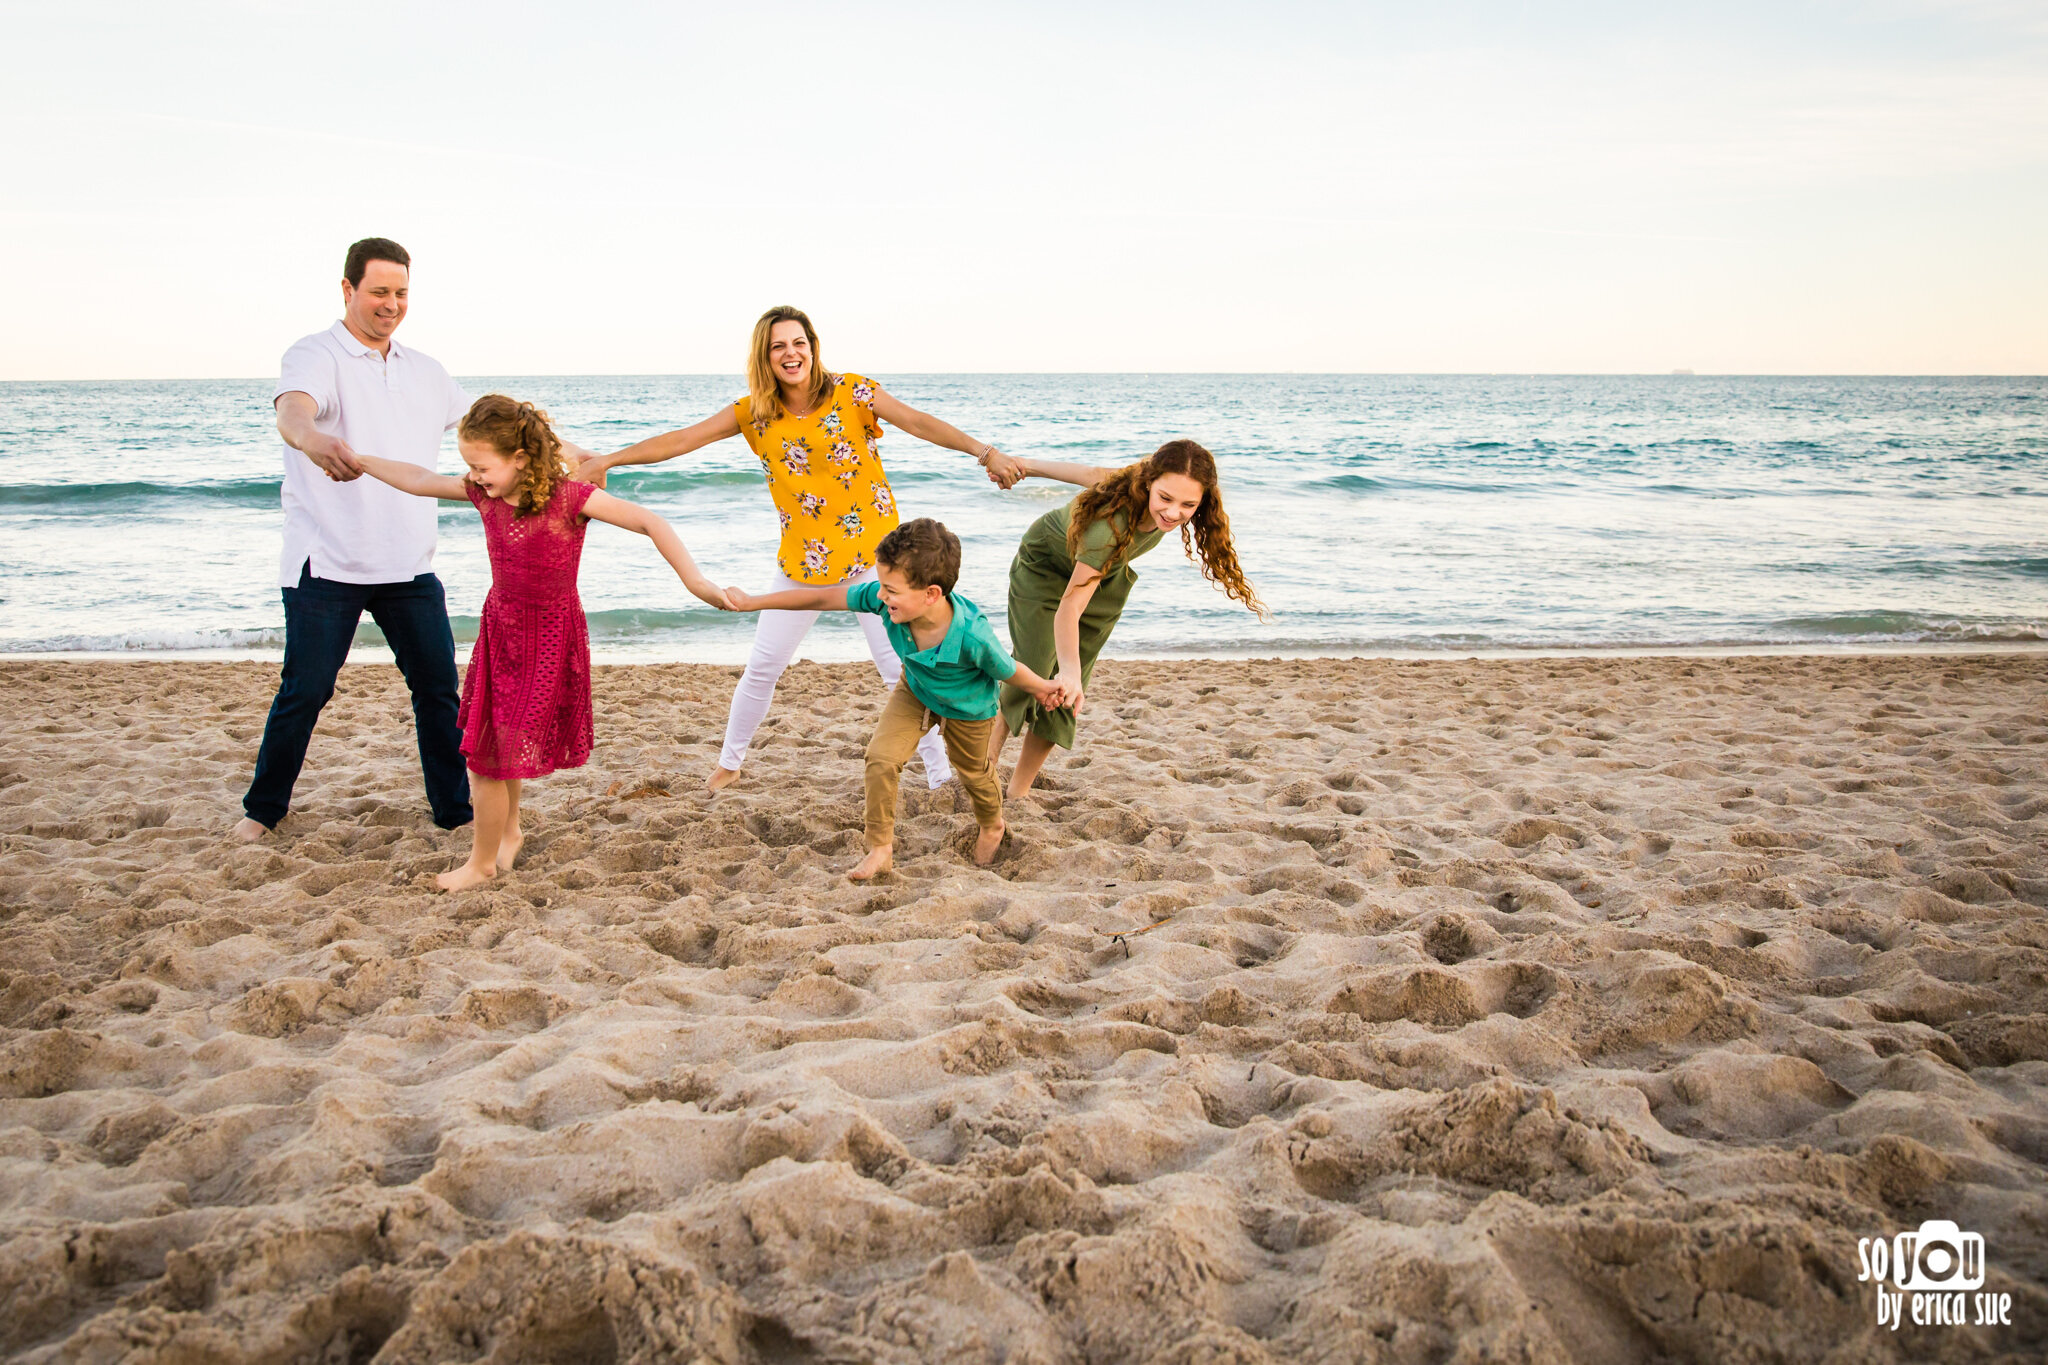 18-so-you-by-erica-sue-lifestyle-family-photographer-lauderdale-by-the-sea-sloan-6447.JPG